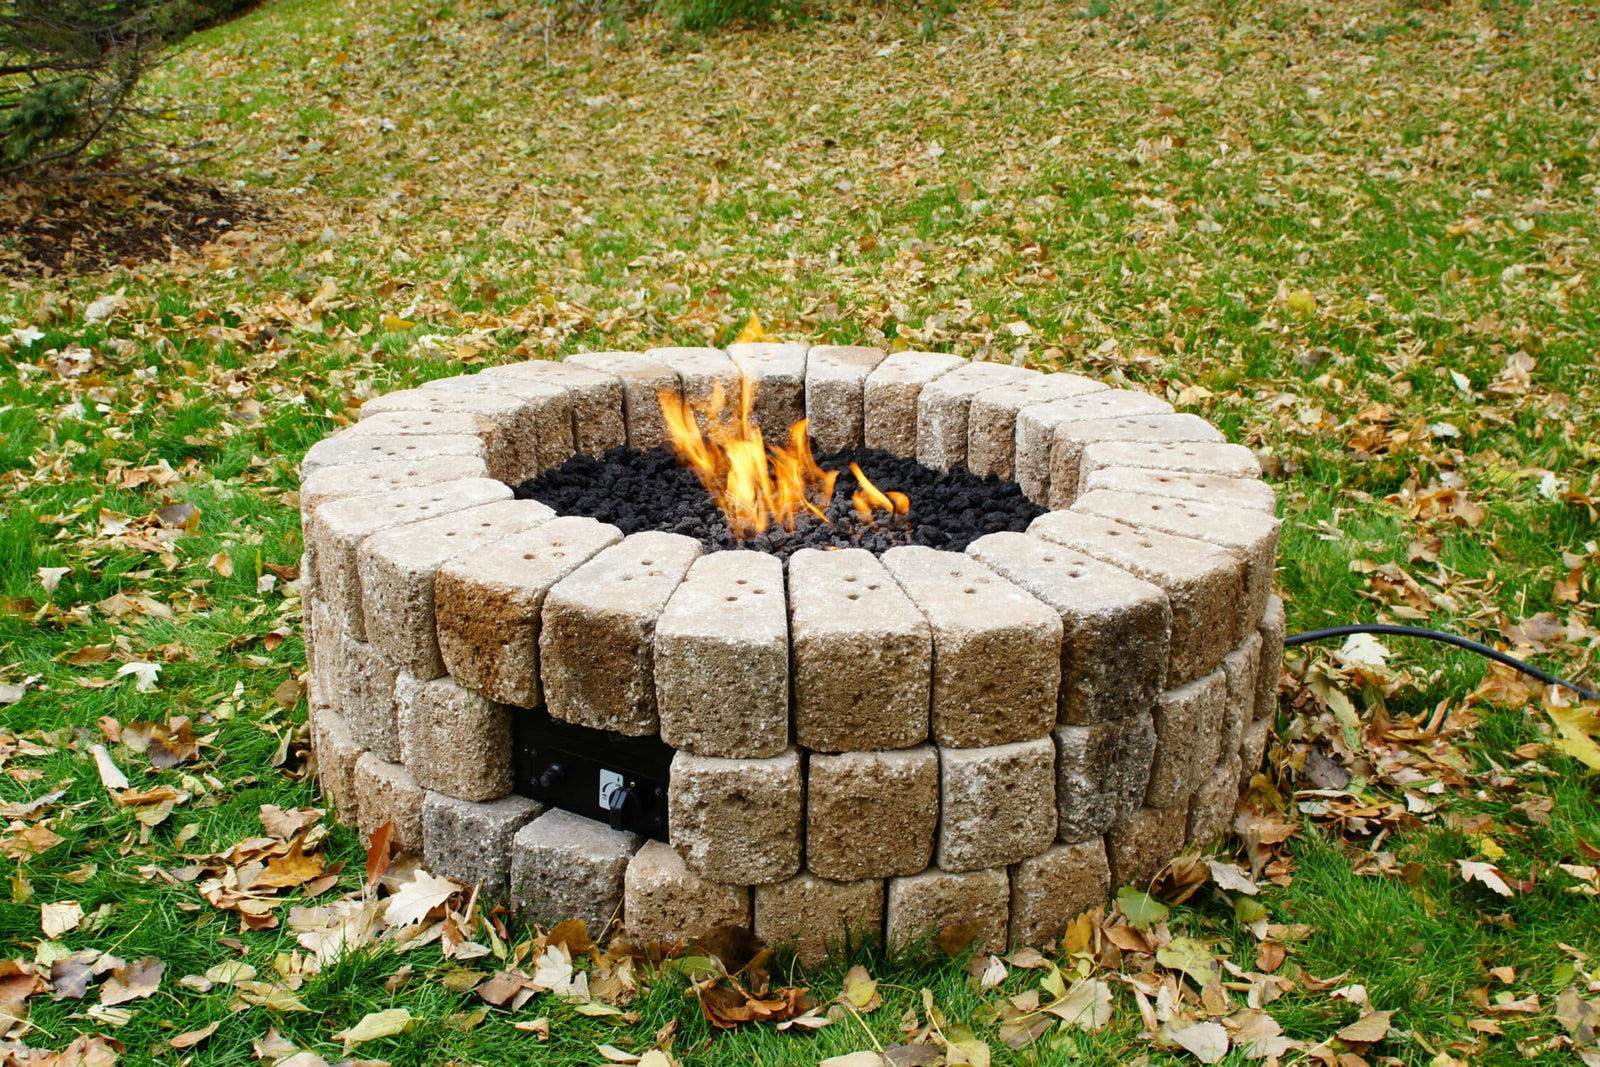 How To: Build A Gas Fire Pit in 10 Steps